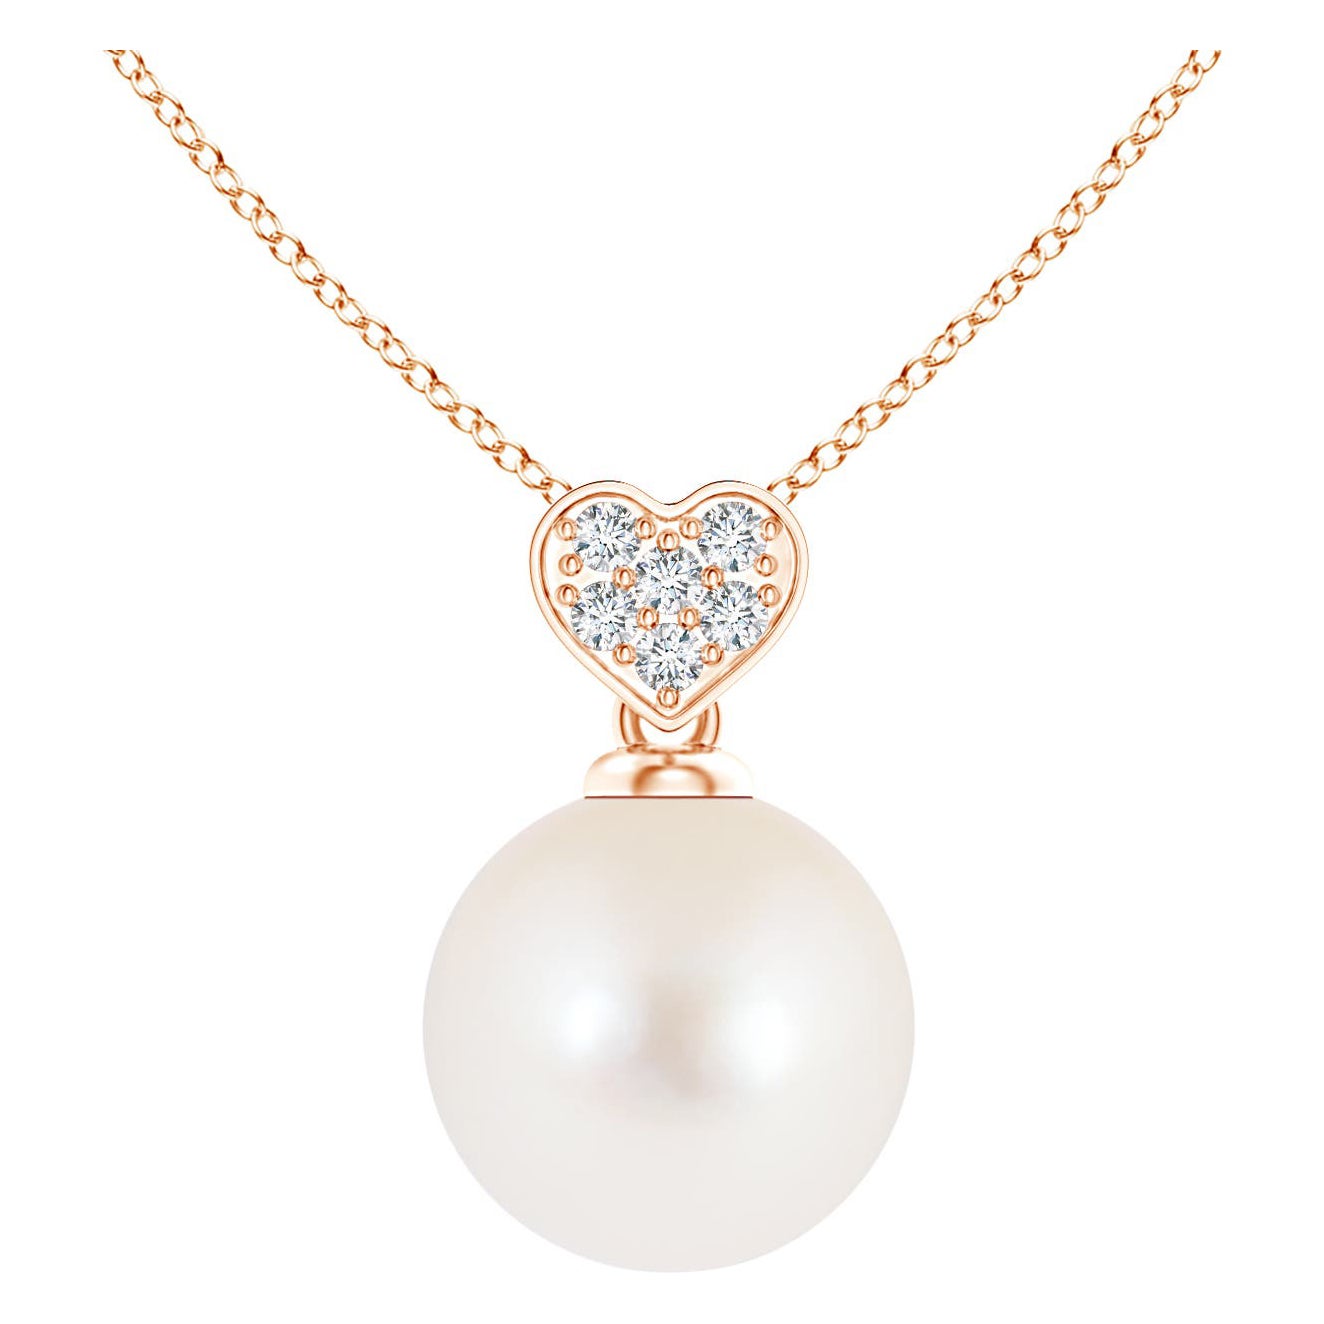 Freshwater Cultured Pearl Pendant with Heart-Shaped Bale in 14K Rose Gold